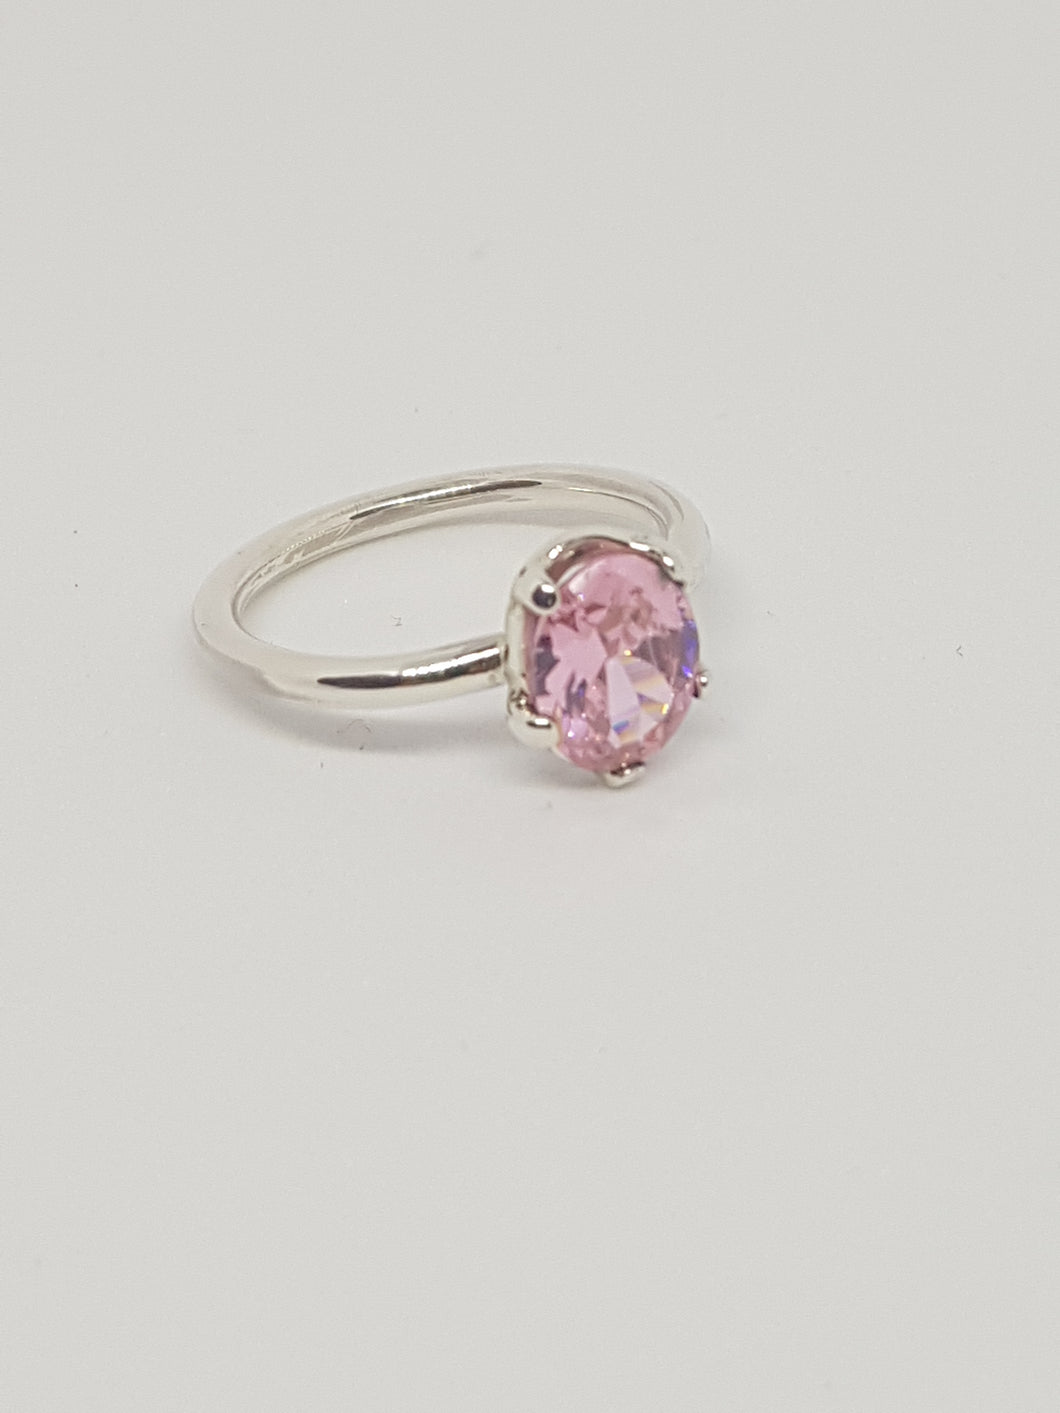 SOLD! Sterling silver ring with pink cubic zirconia